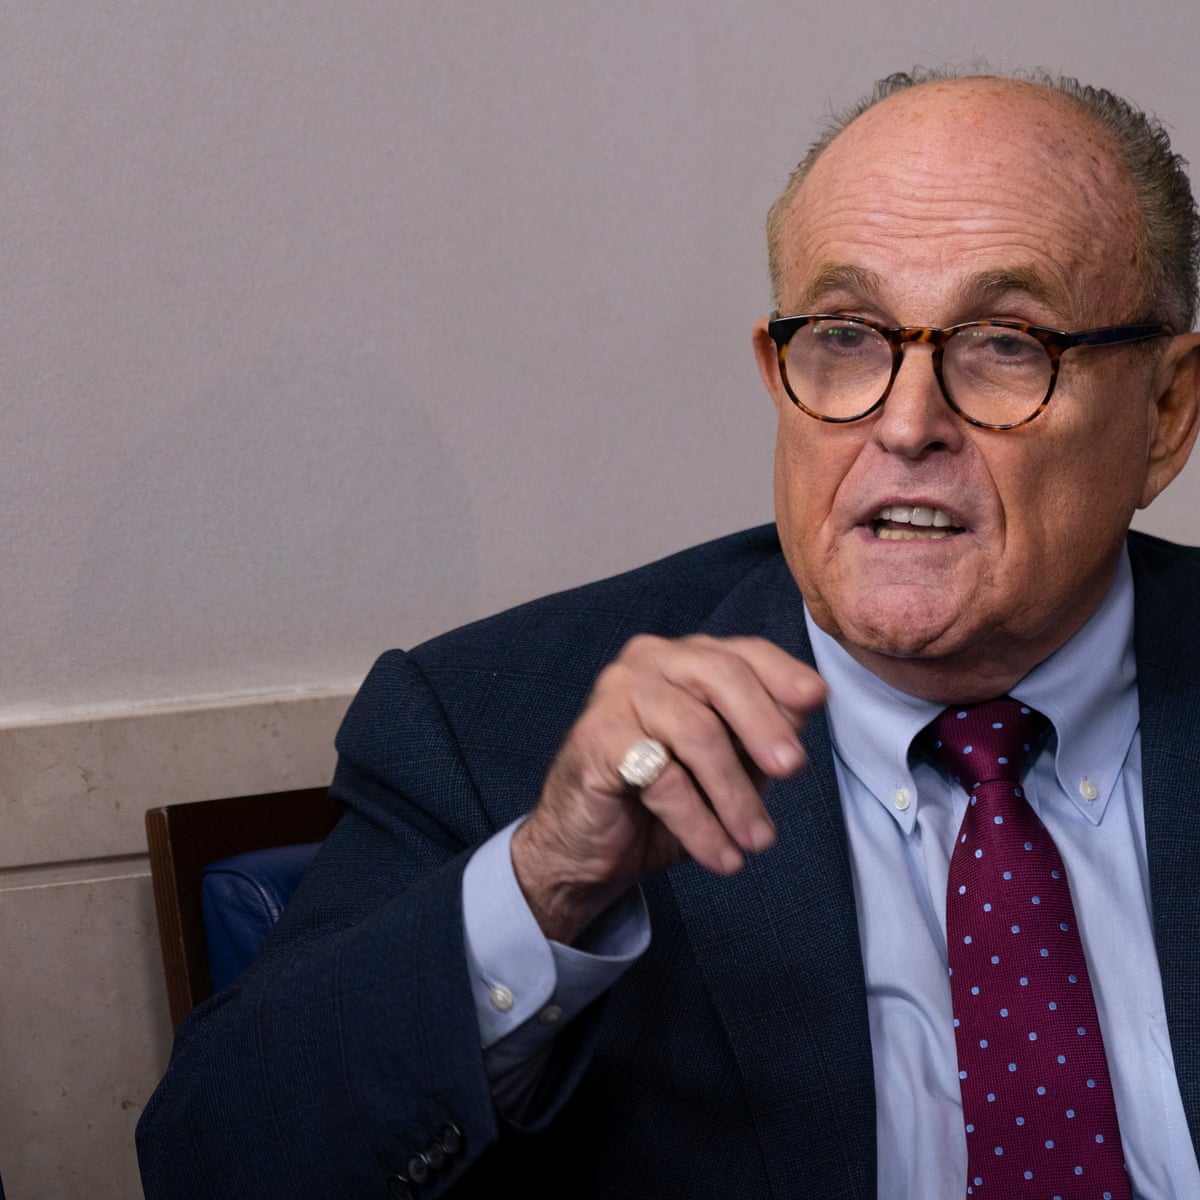 Rudy Giuliani acknowledged he can't really be Trump's prosecution legal advisor since he's an observer for the situation